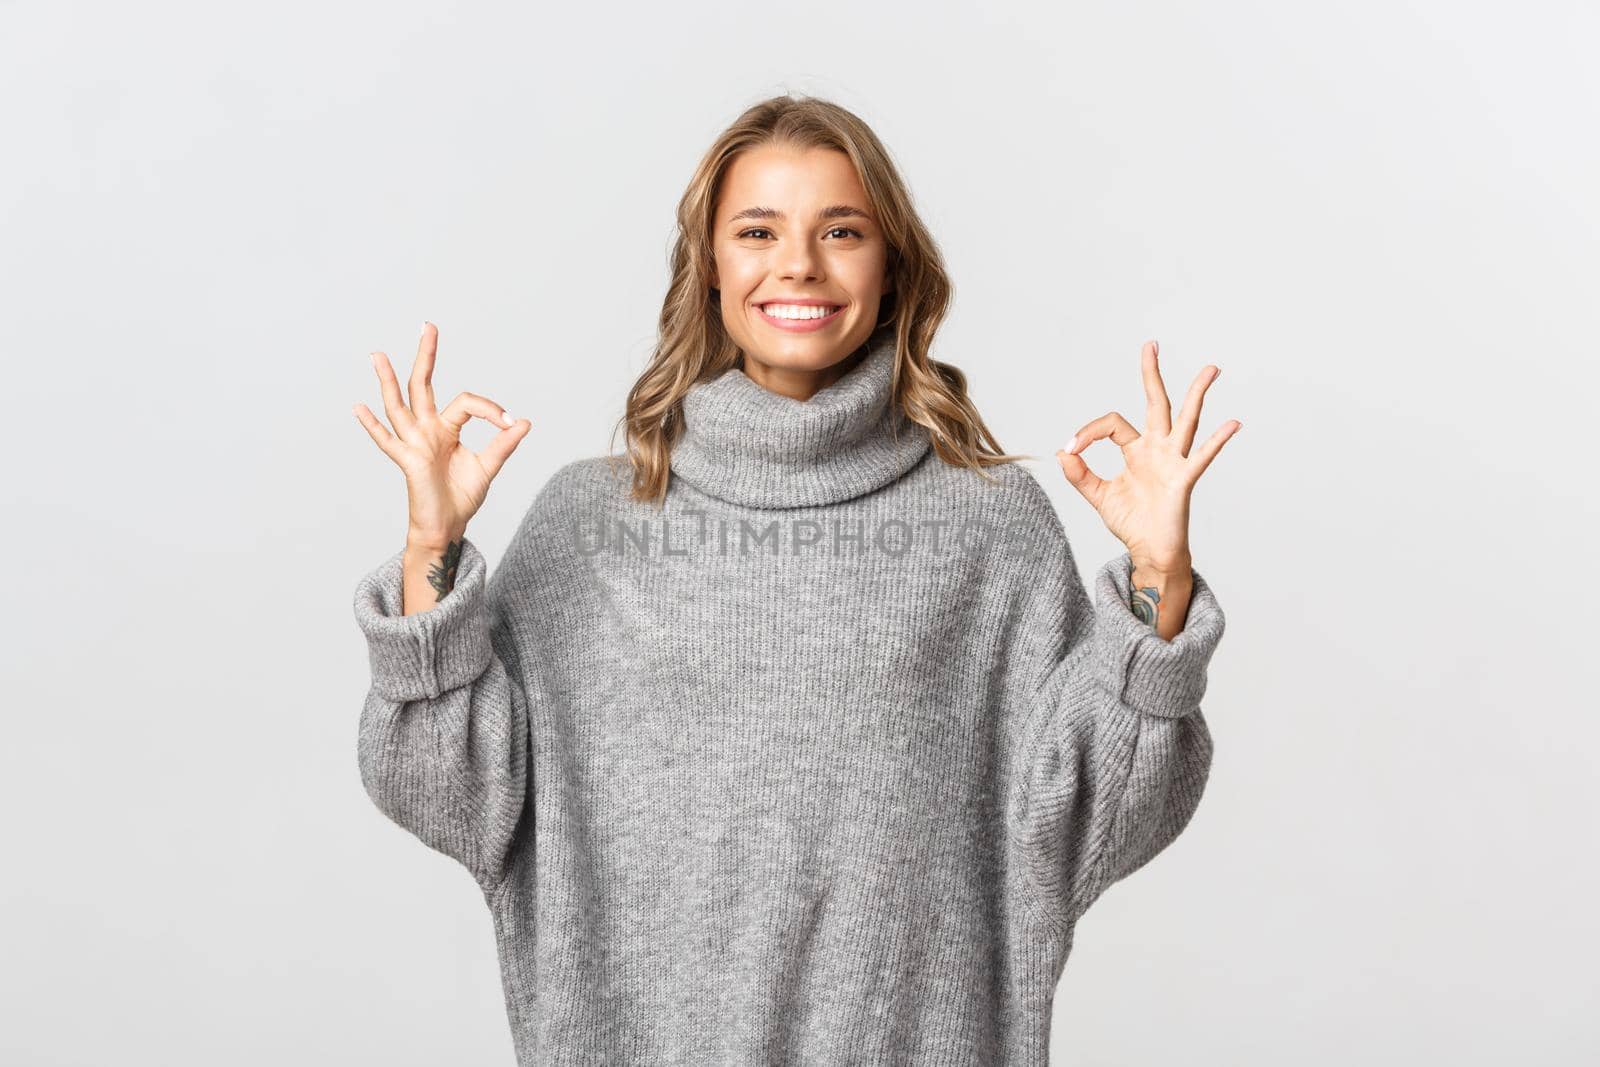 Young satisfied woman with blond short hair, wearing grey sweater, showing okay signs and smiling pleased, standing over white background.